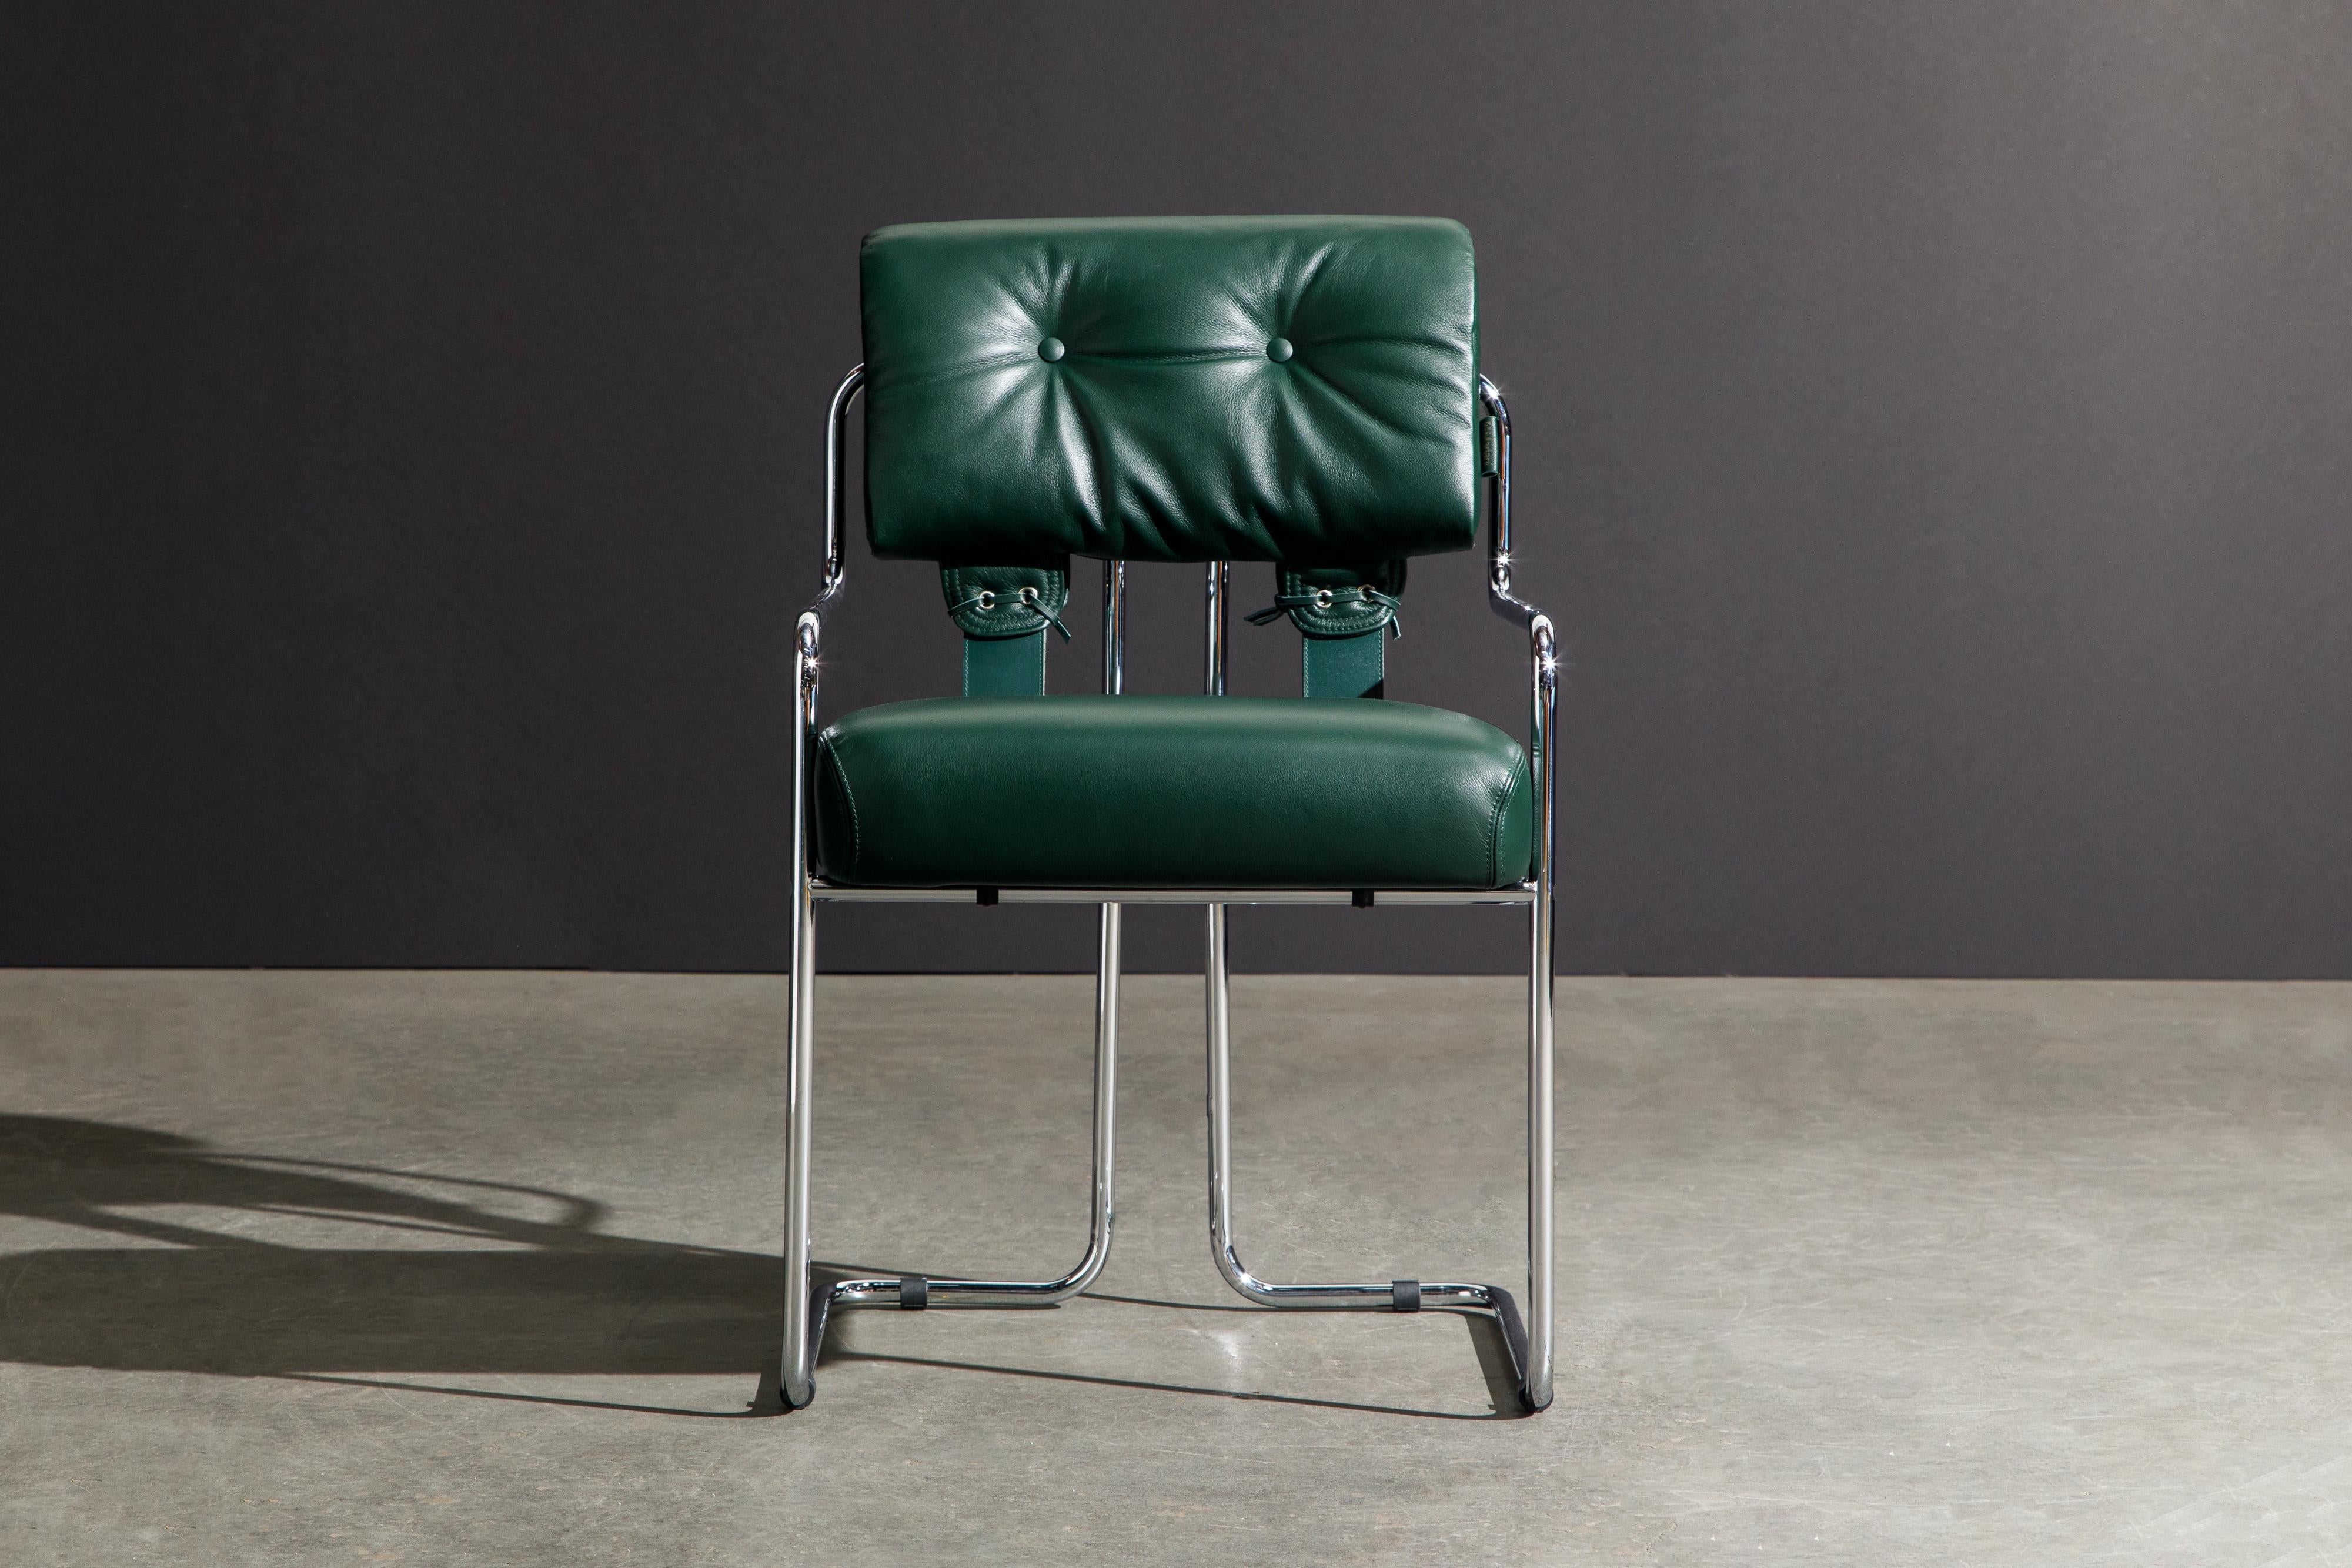 Set of four Tucroma armchairs in beautiful emerald green leather with polished chrome frames. The seats and backs have supple green leather upholstery and are attached to graceful polished steel tubular frames, as well as being bridged together by